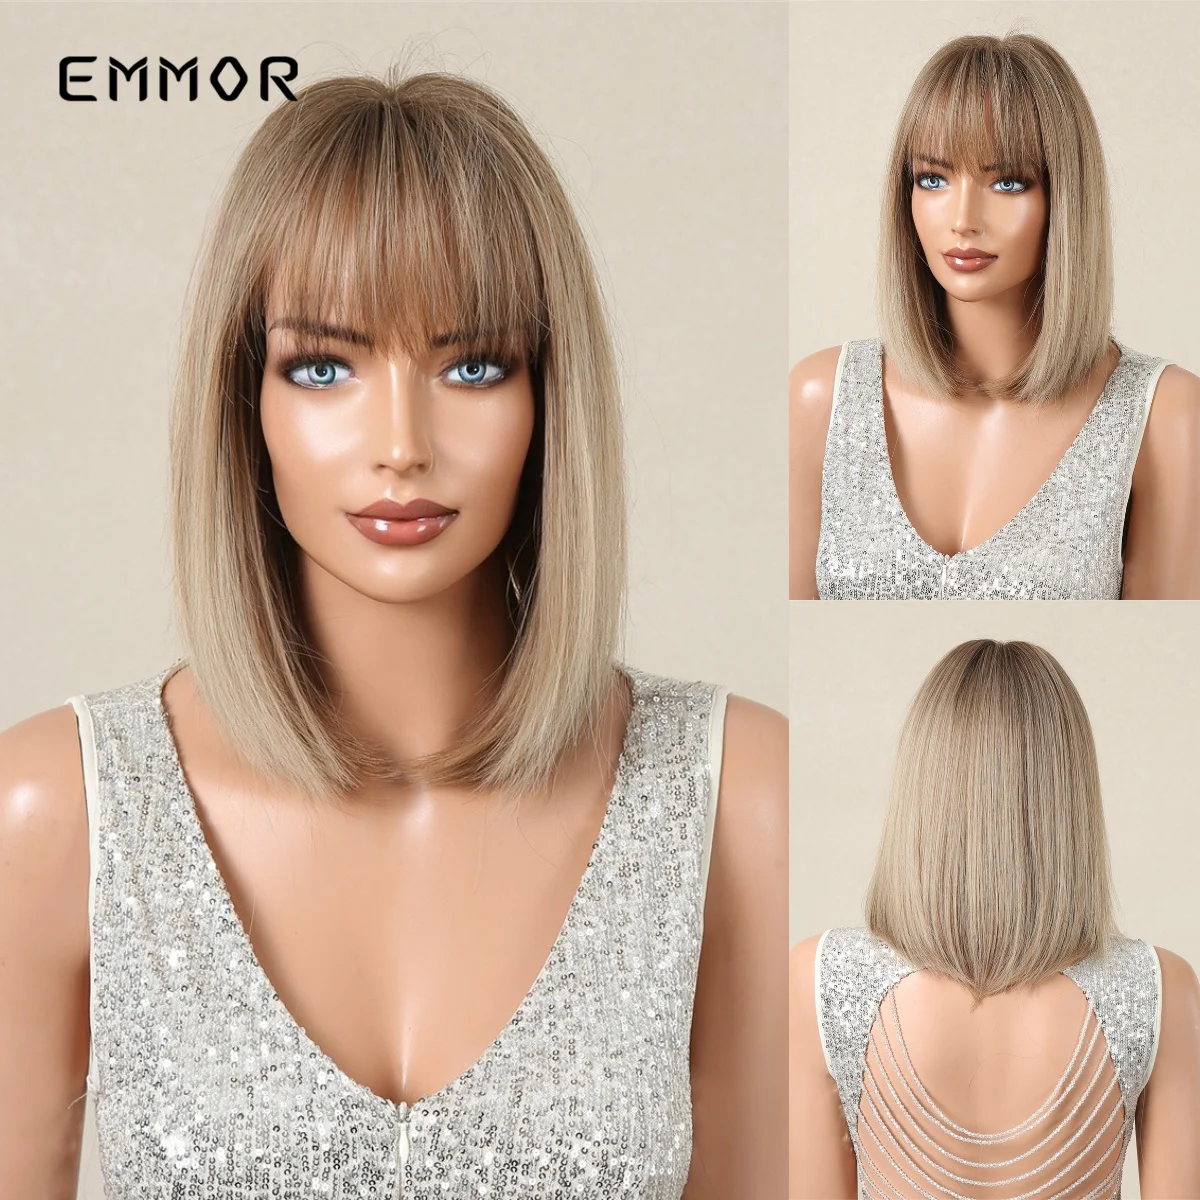 Short Synthetic Emmor Platinum Curly Wigs with Bangs Light Brown Bob Wavy Hair for Black Women Cosplay Natural Heat Resistant